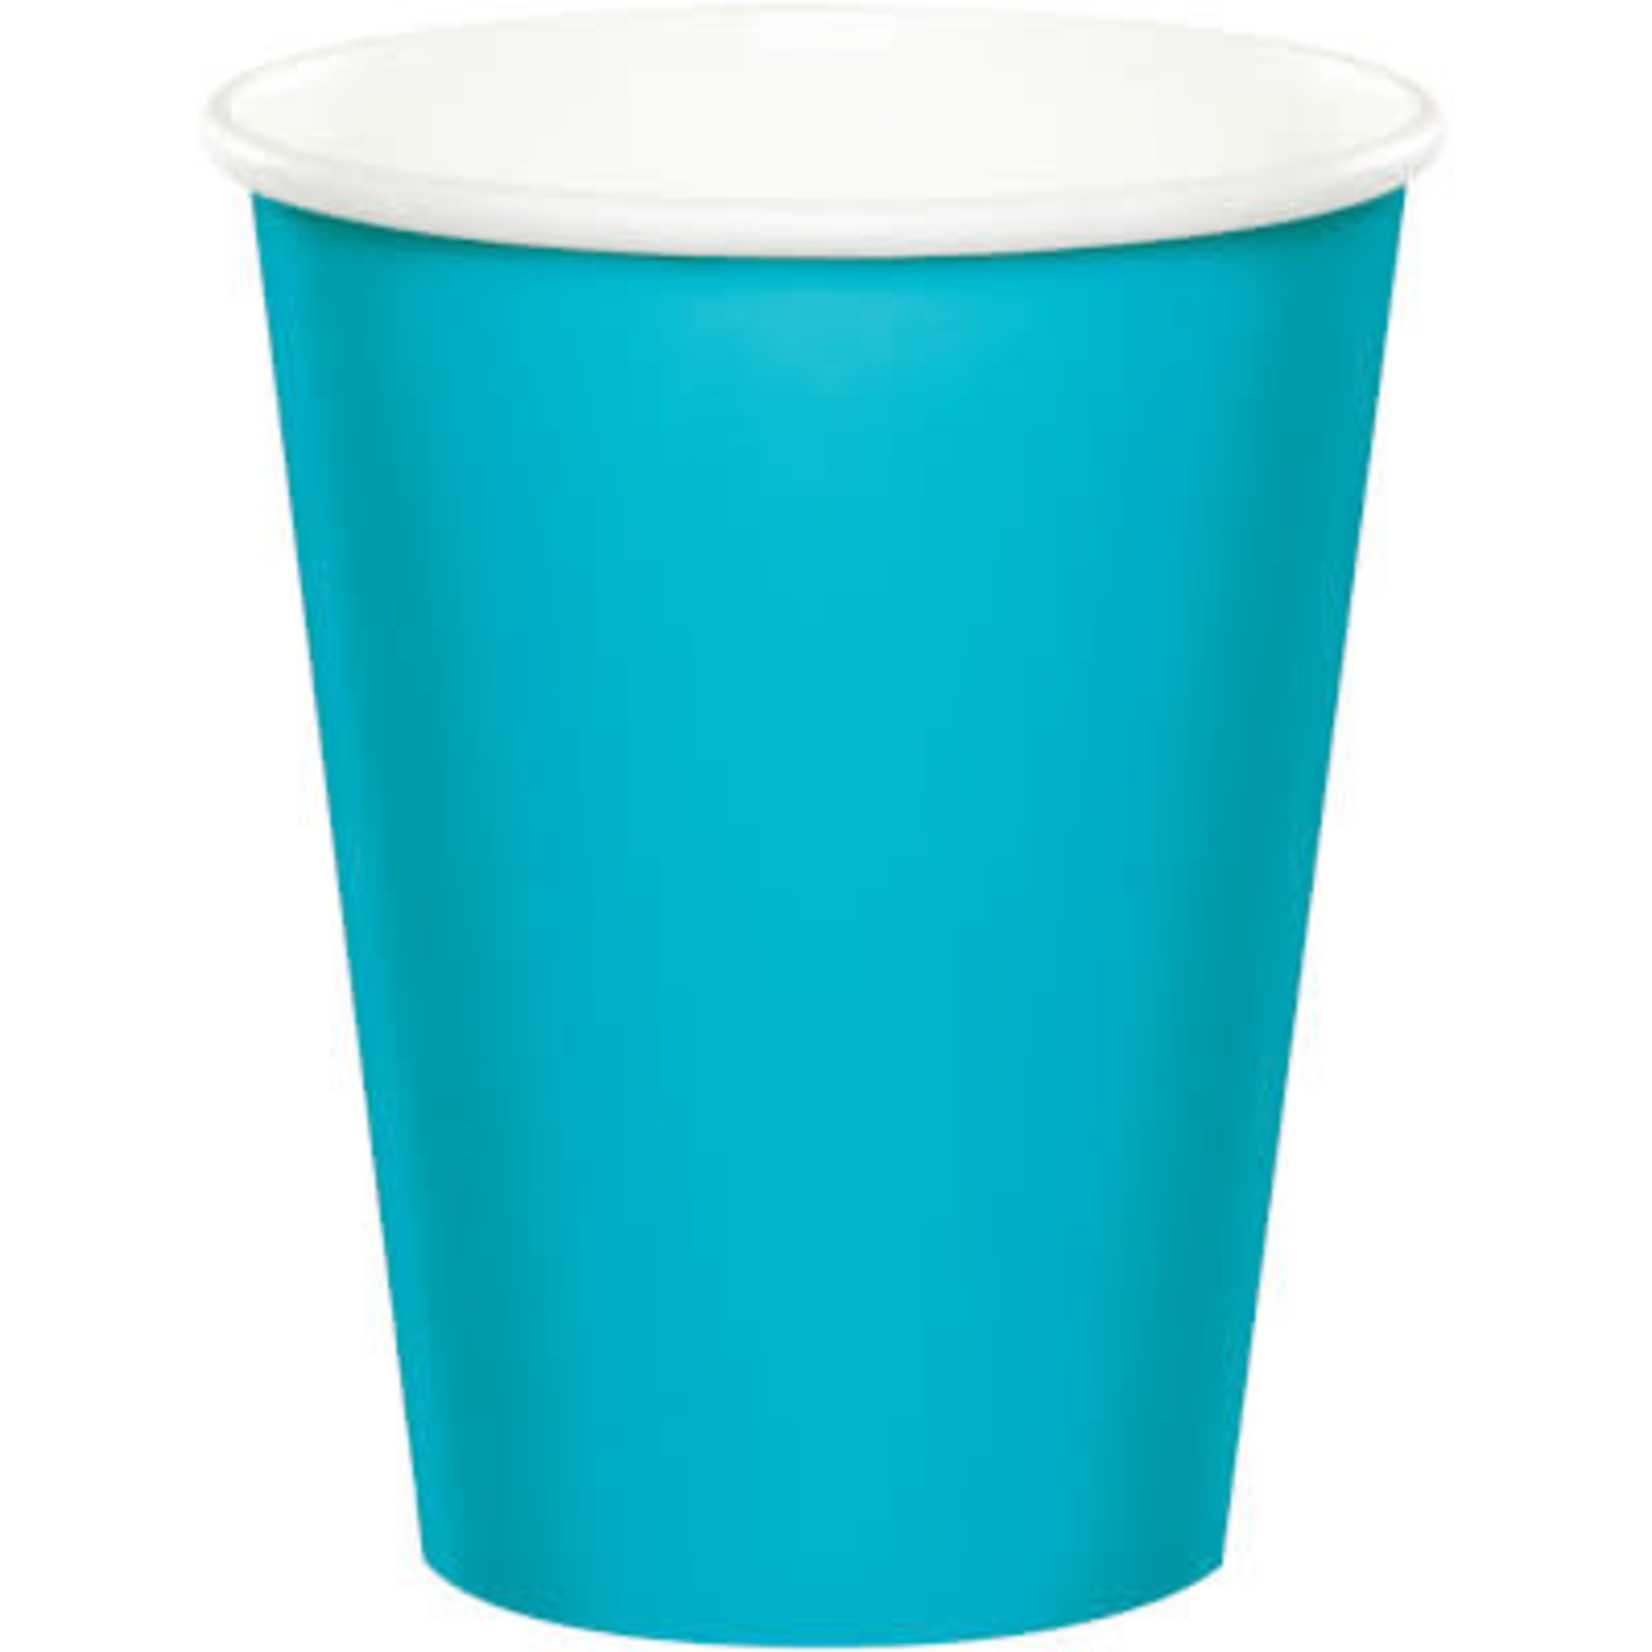 Touch of Color 9oz. Bermuda Blue Hot/Cold Paper Cups - 24ct.